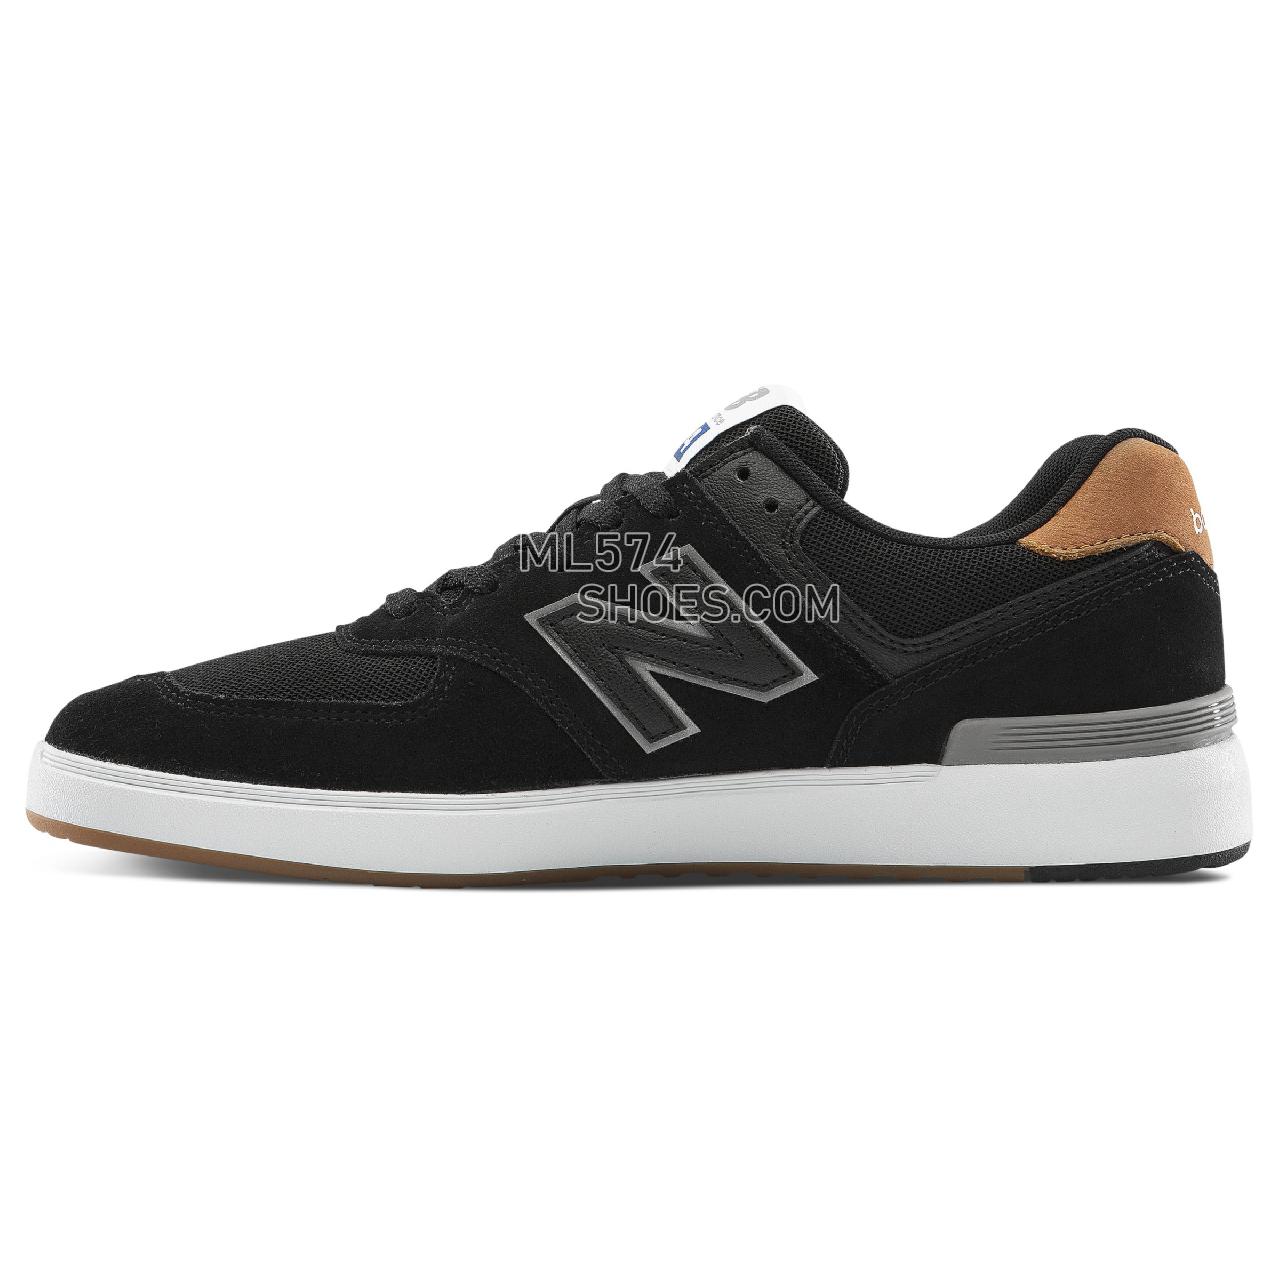 New Balance AM574 - Men's 574 - Classic Navy with Grey - AM574BLG